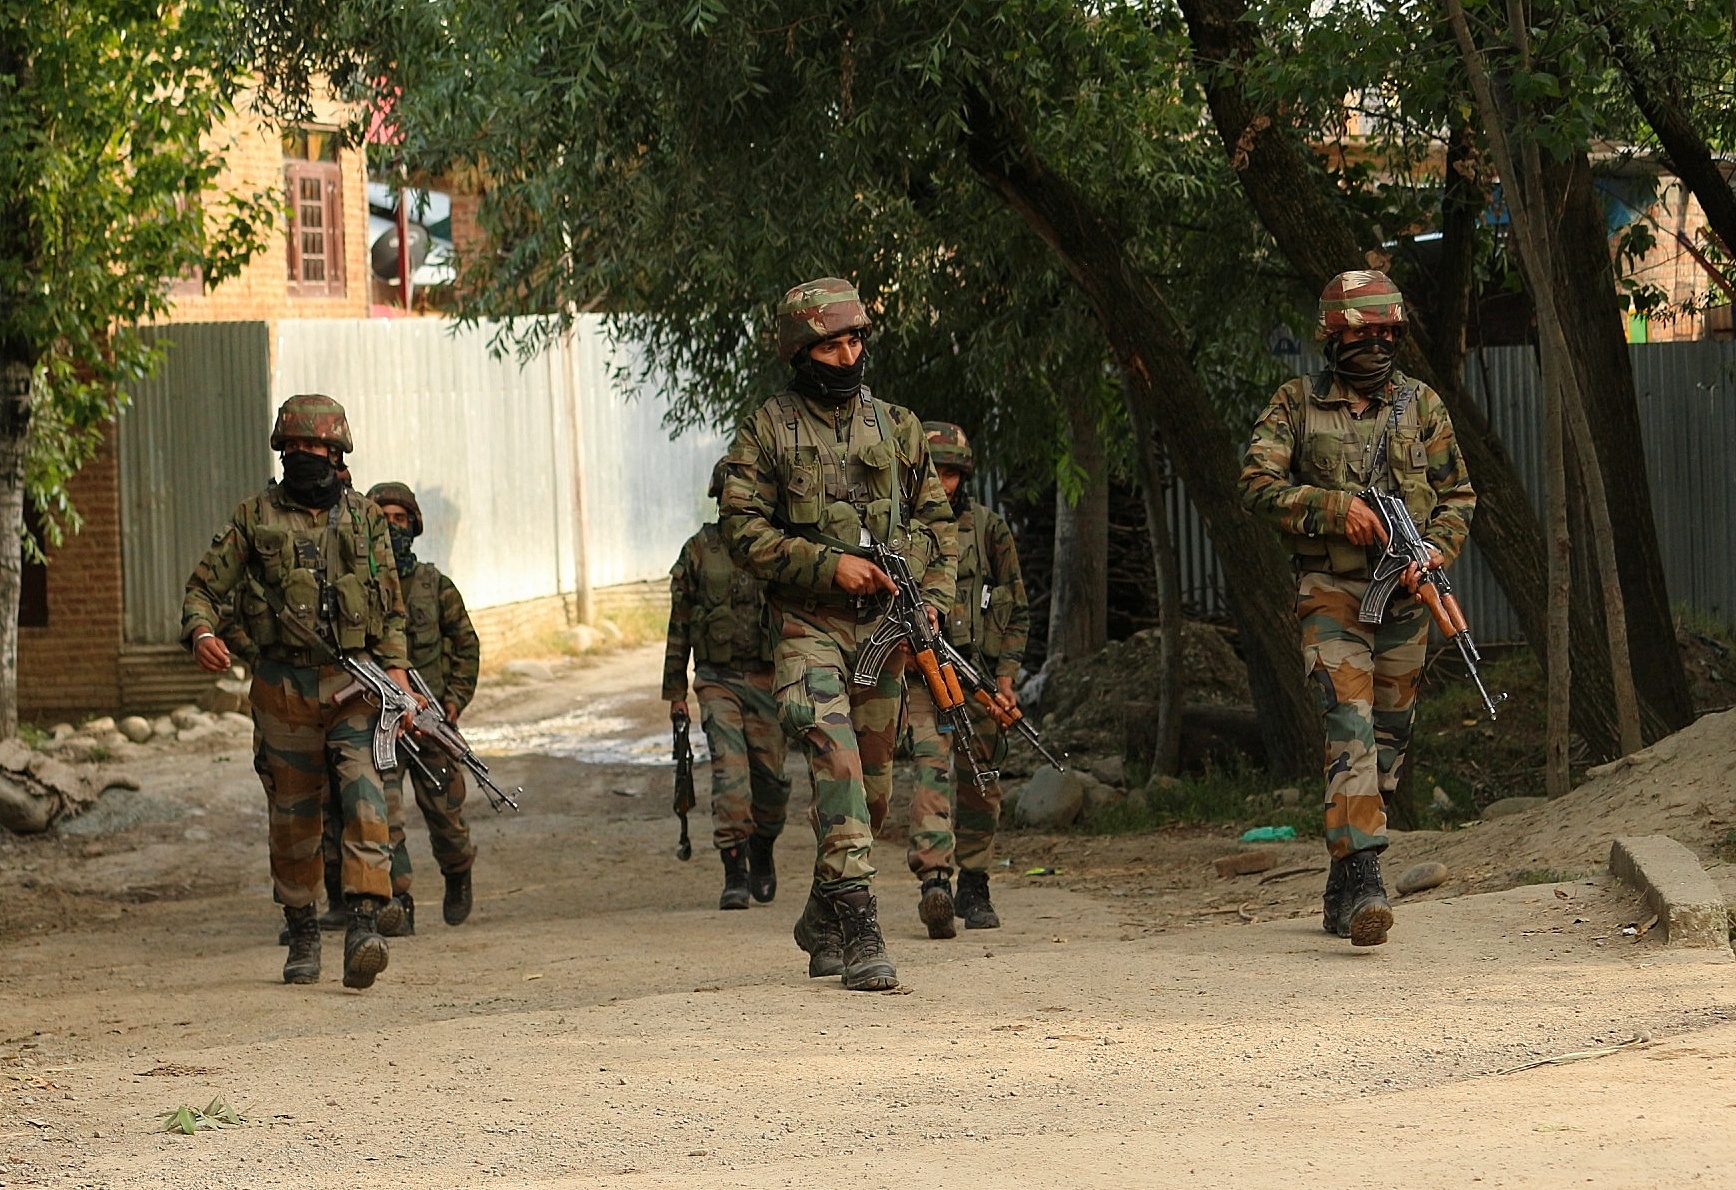 Pulwama: Army personnel carry out a search and cordon operation after one terrorist was killed and one army jawan also died in action and a policeman of the special operations group of Jammu and Kashmir police was injured in an encounter in Jammu and Kashmir's Pulwama district on July 7, 2020. (Photo: IANS)